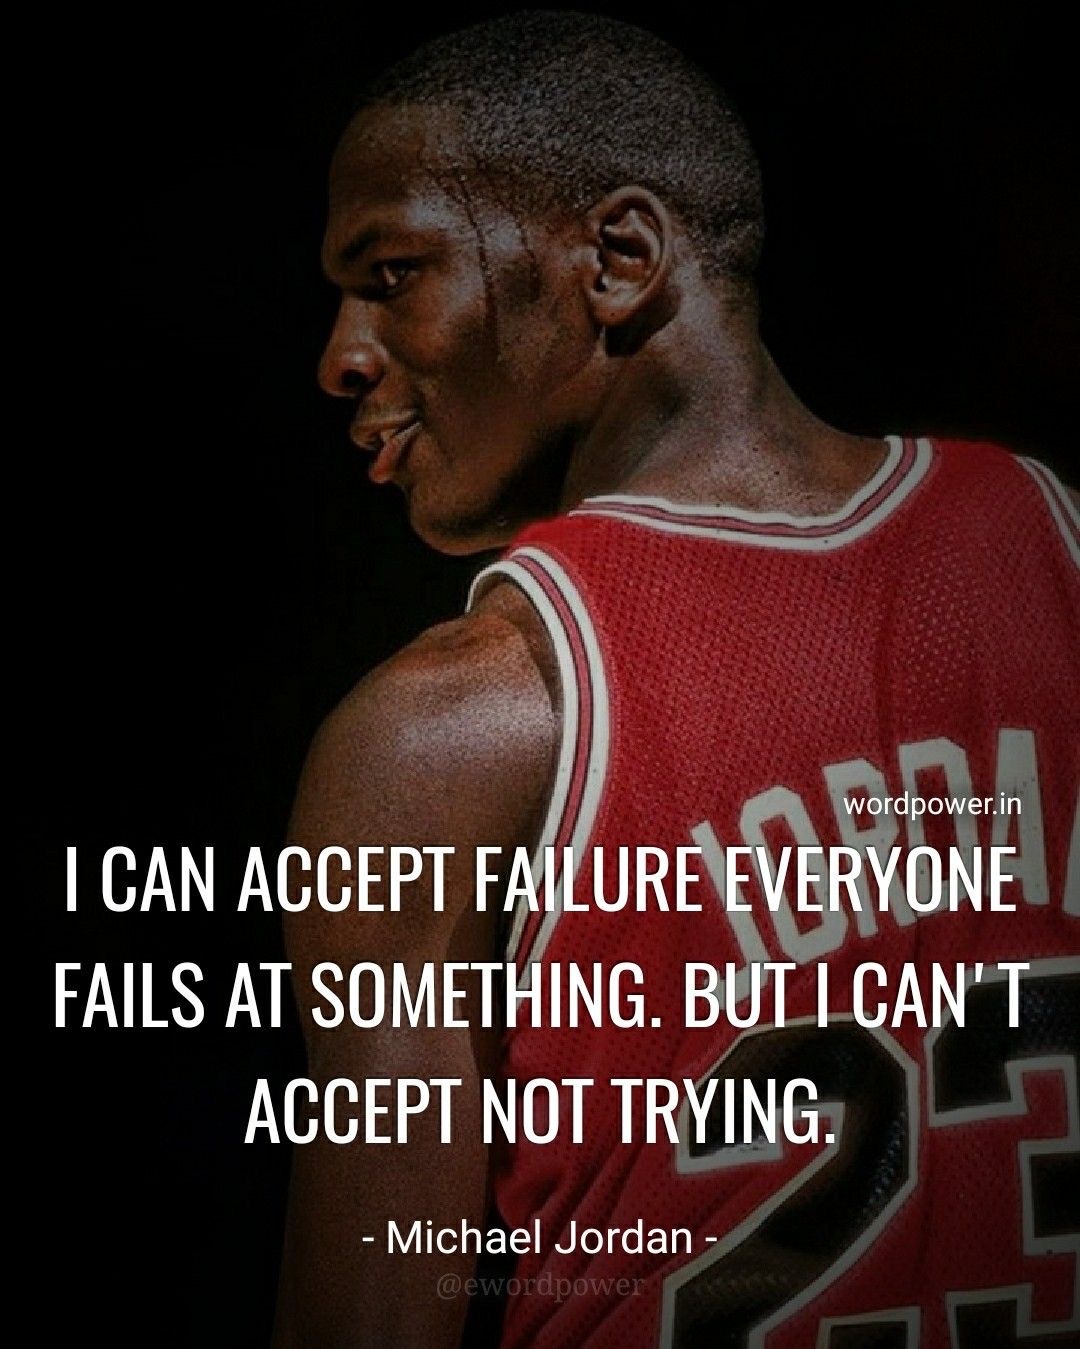 få Før galop Darryl E. Peek II on Twitter: "“I can accept failure. Everyone fails at  something. But I can't accept not trying.” - Michael Jordan #quotation # quotes #dailyquotes #quoted #quoteoftheday #quote #motivation #life #belief  #